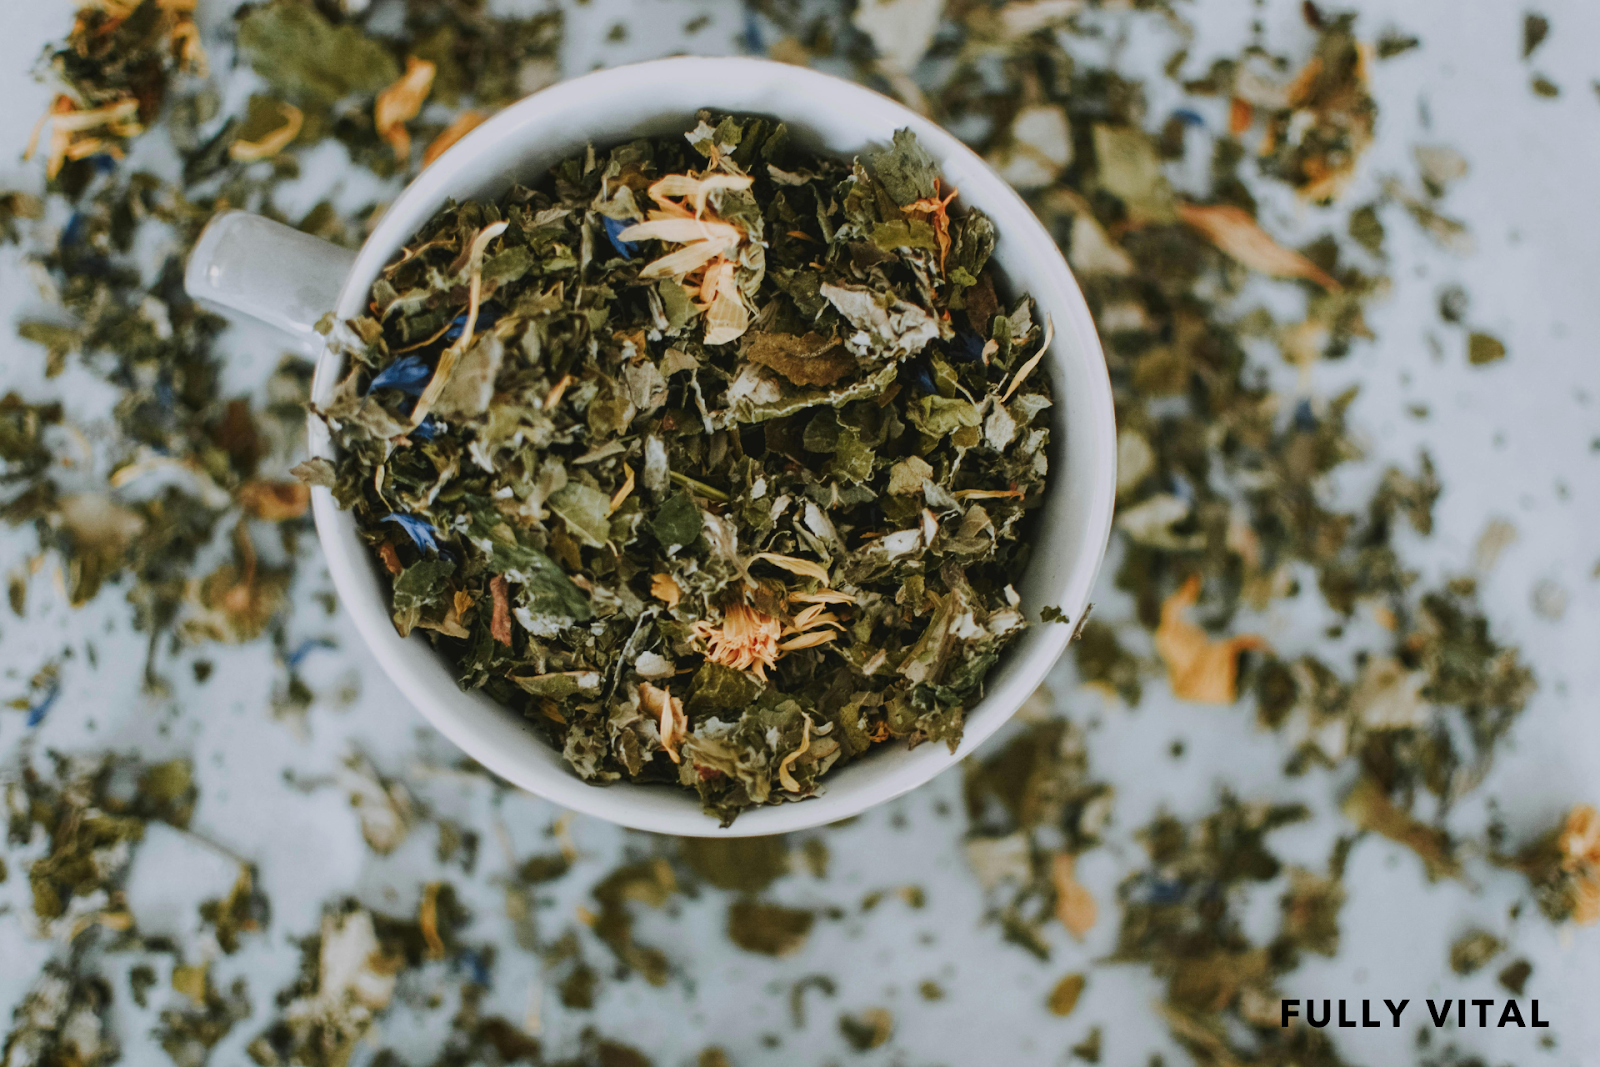 Green Tea For Hair: More Than Just A Drink